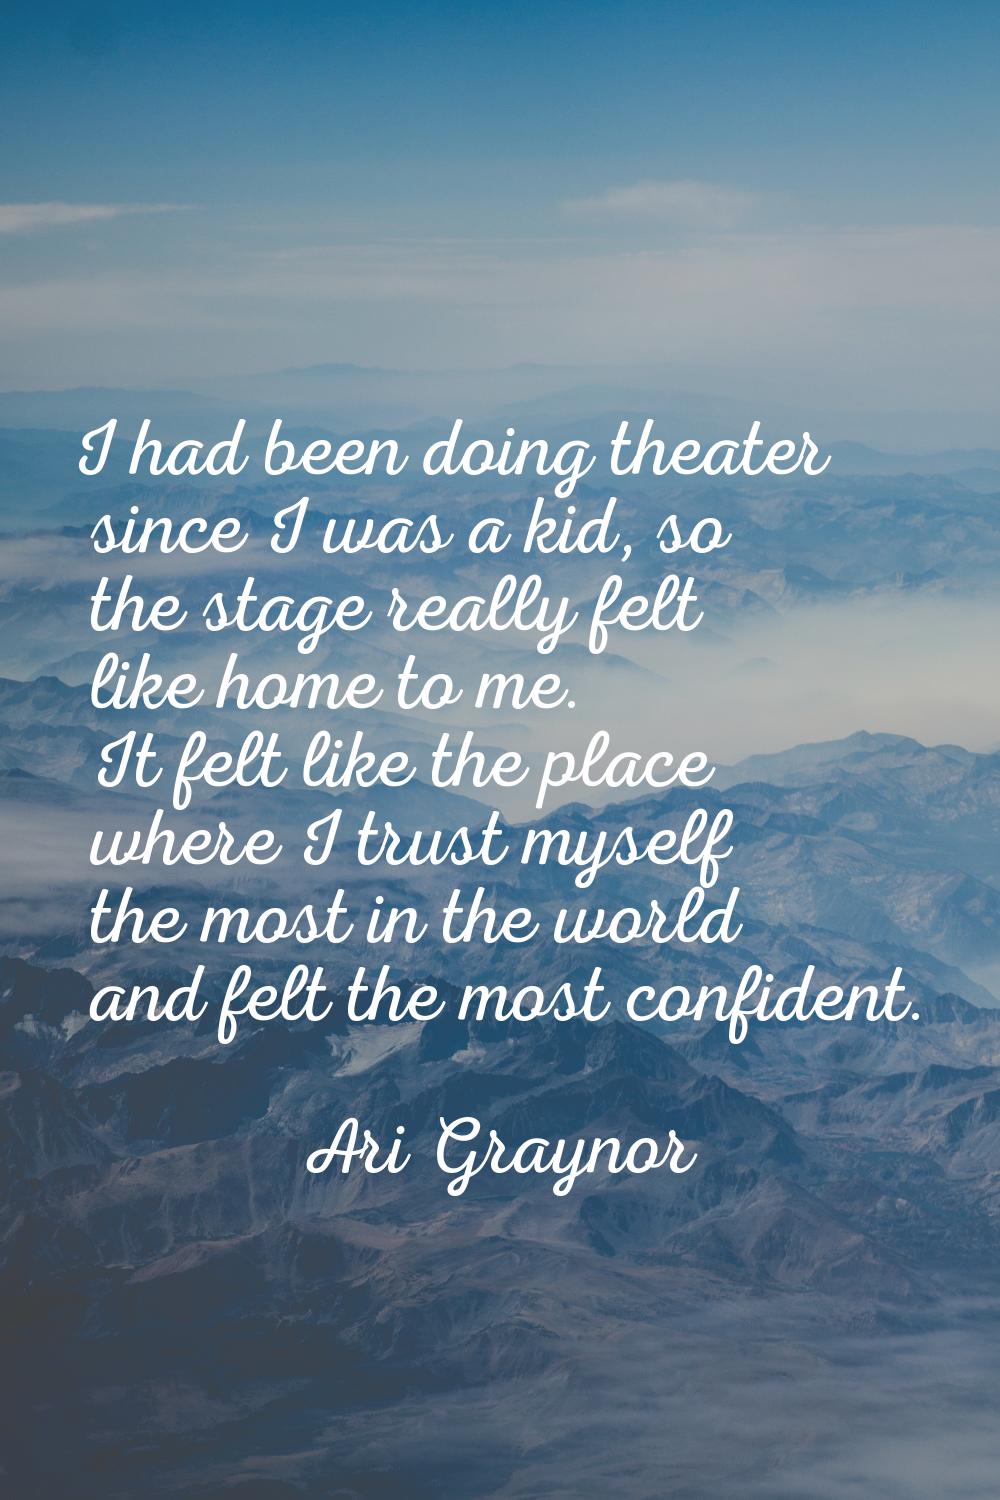 I had been doing theater since I was a kid, so the stage really felt like home to me. It felt like 